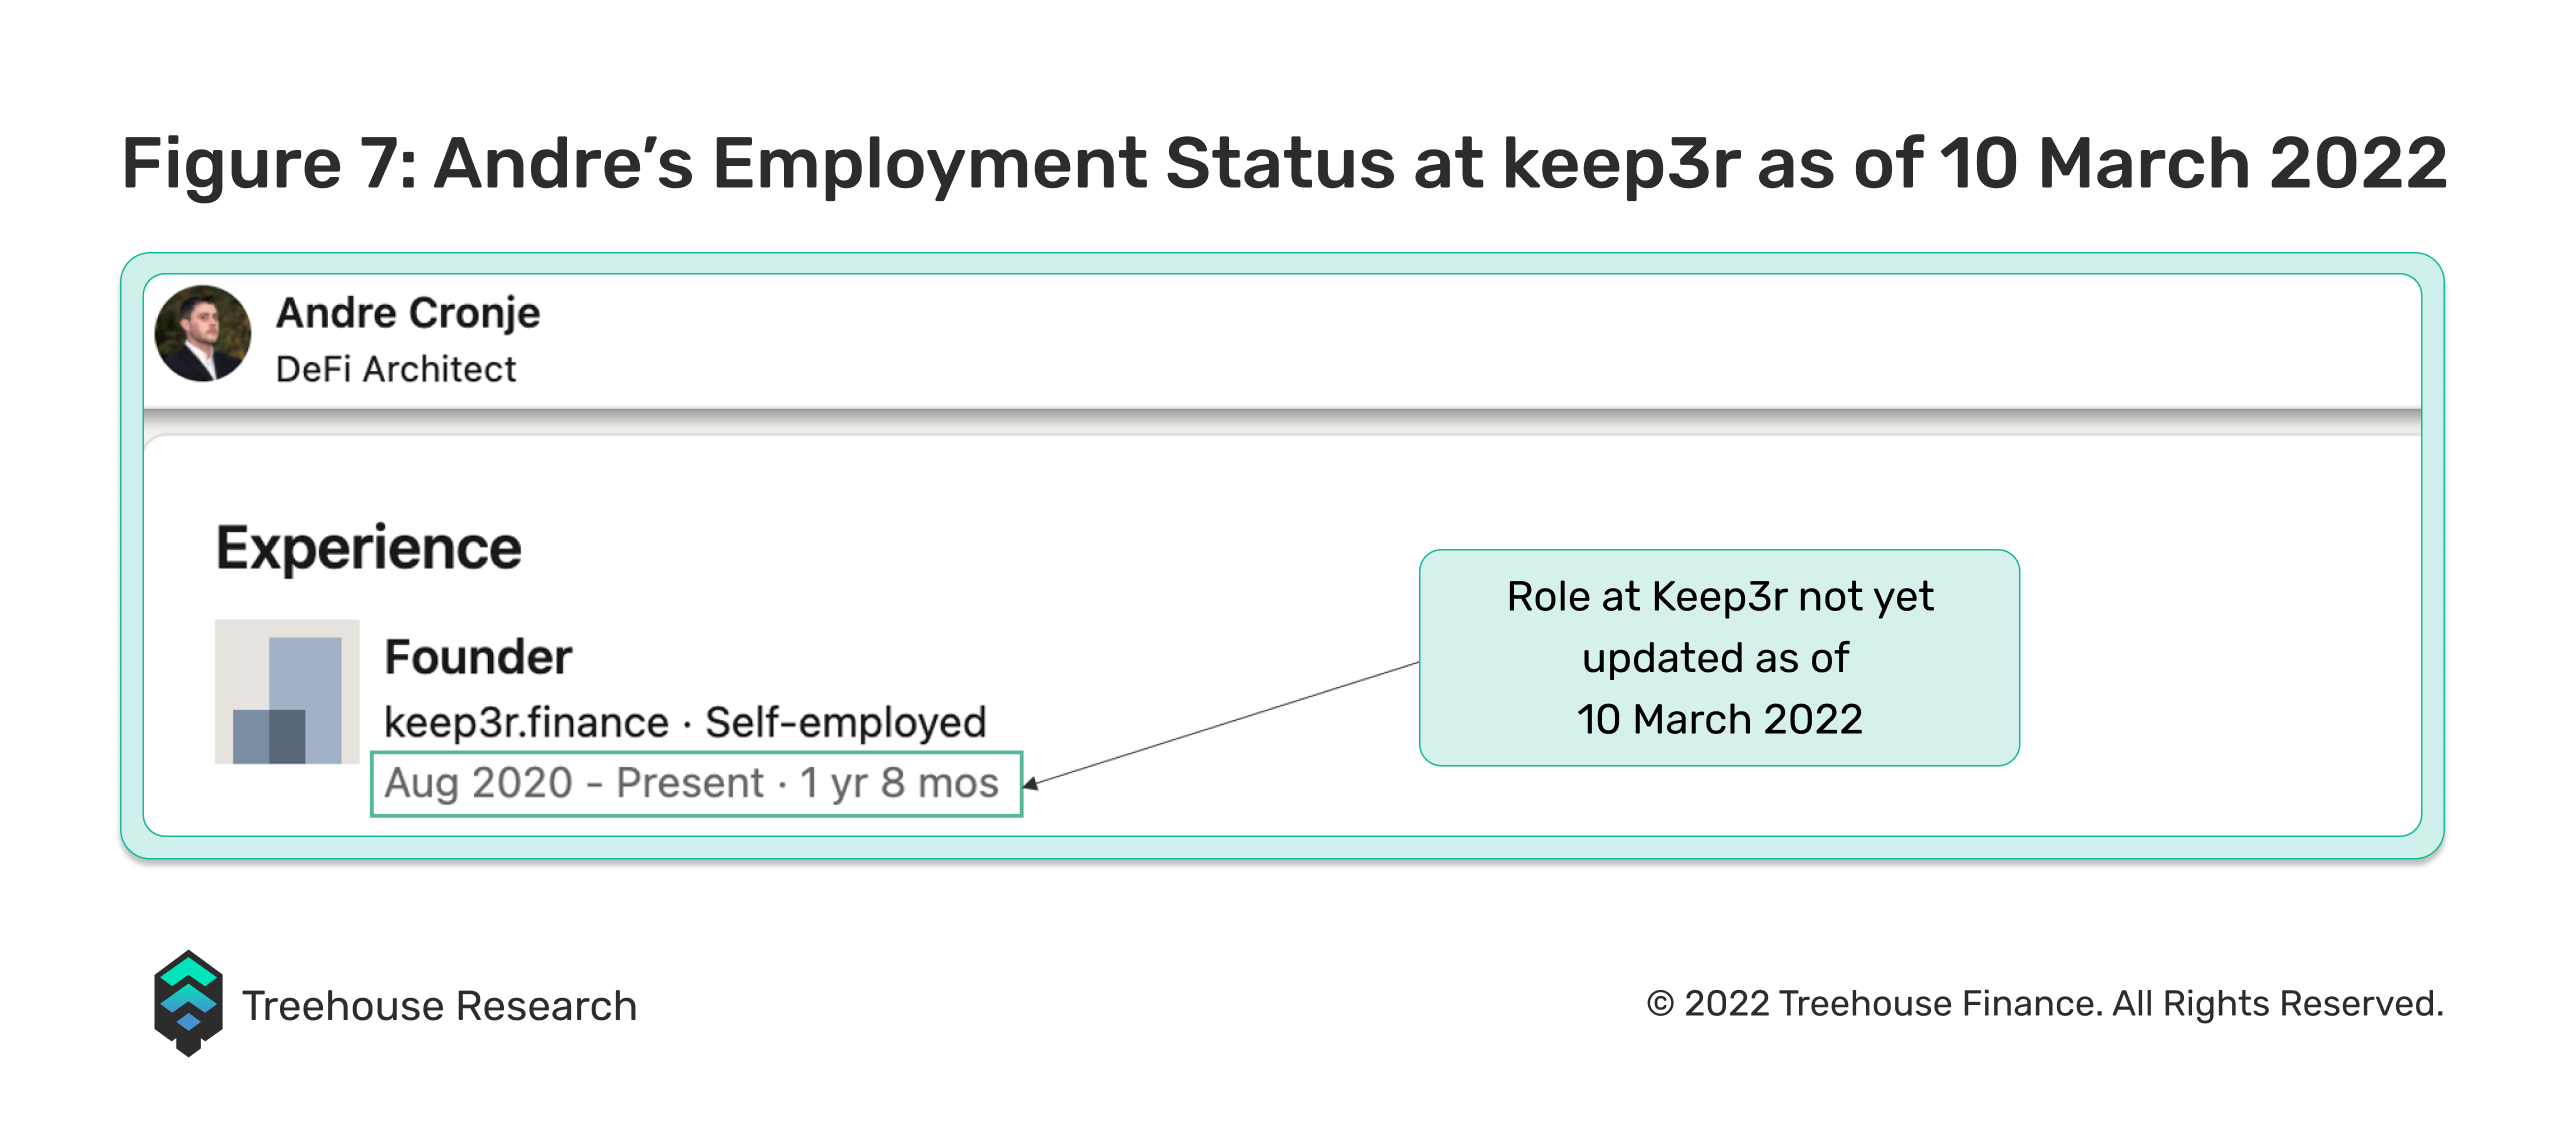 andre cronje's employment status at keep3r as of 10 march 2022